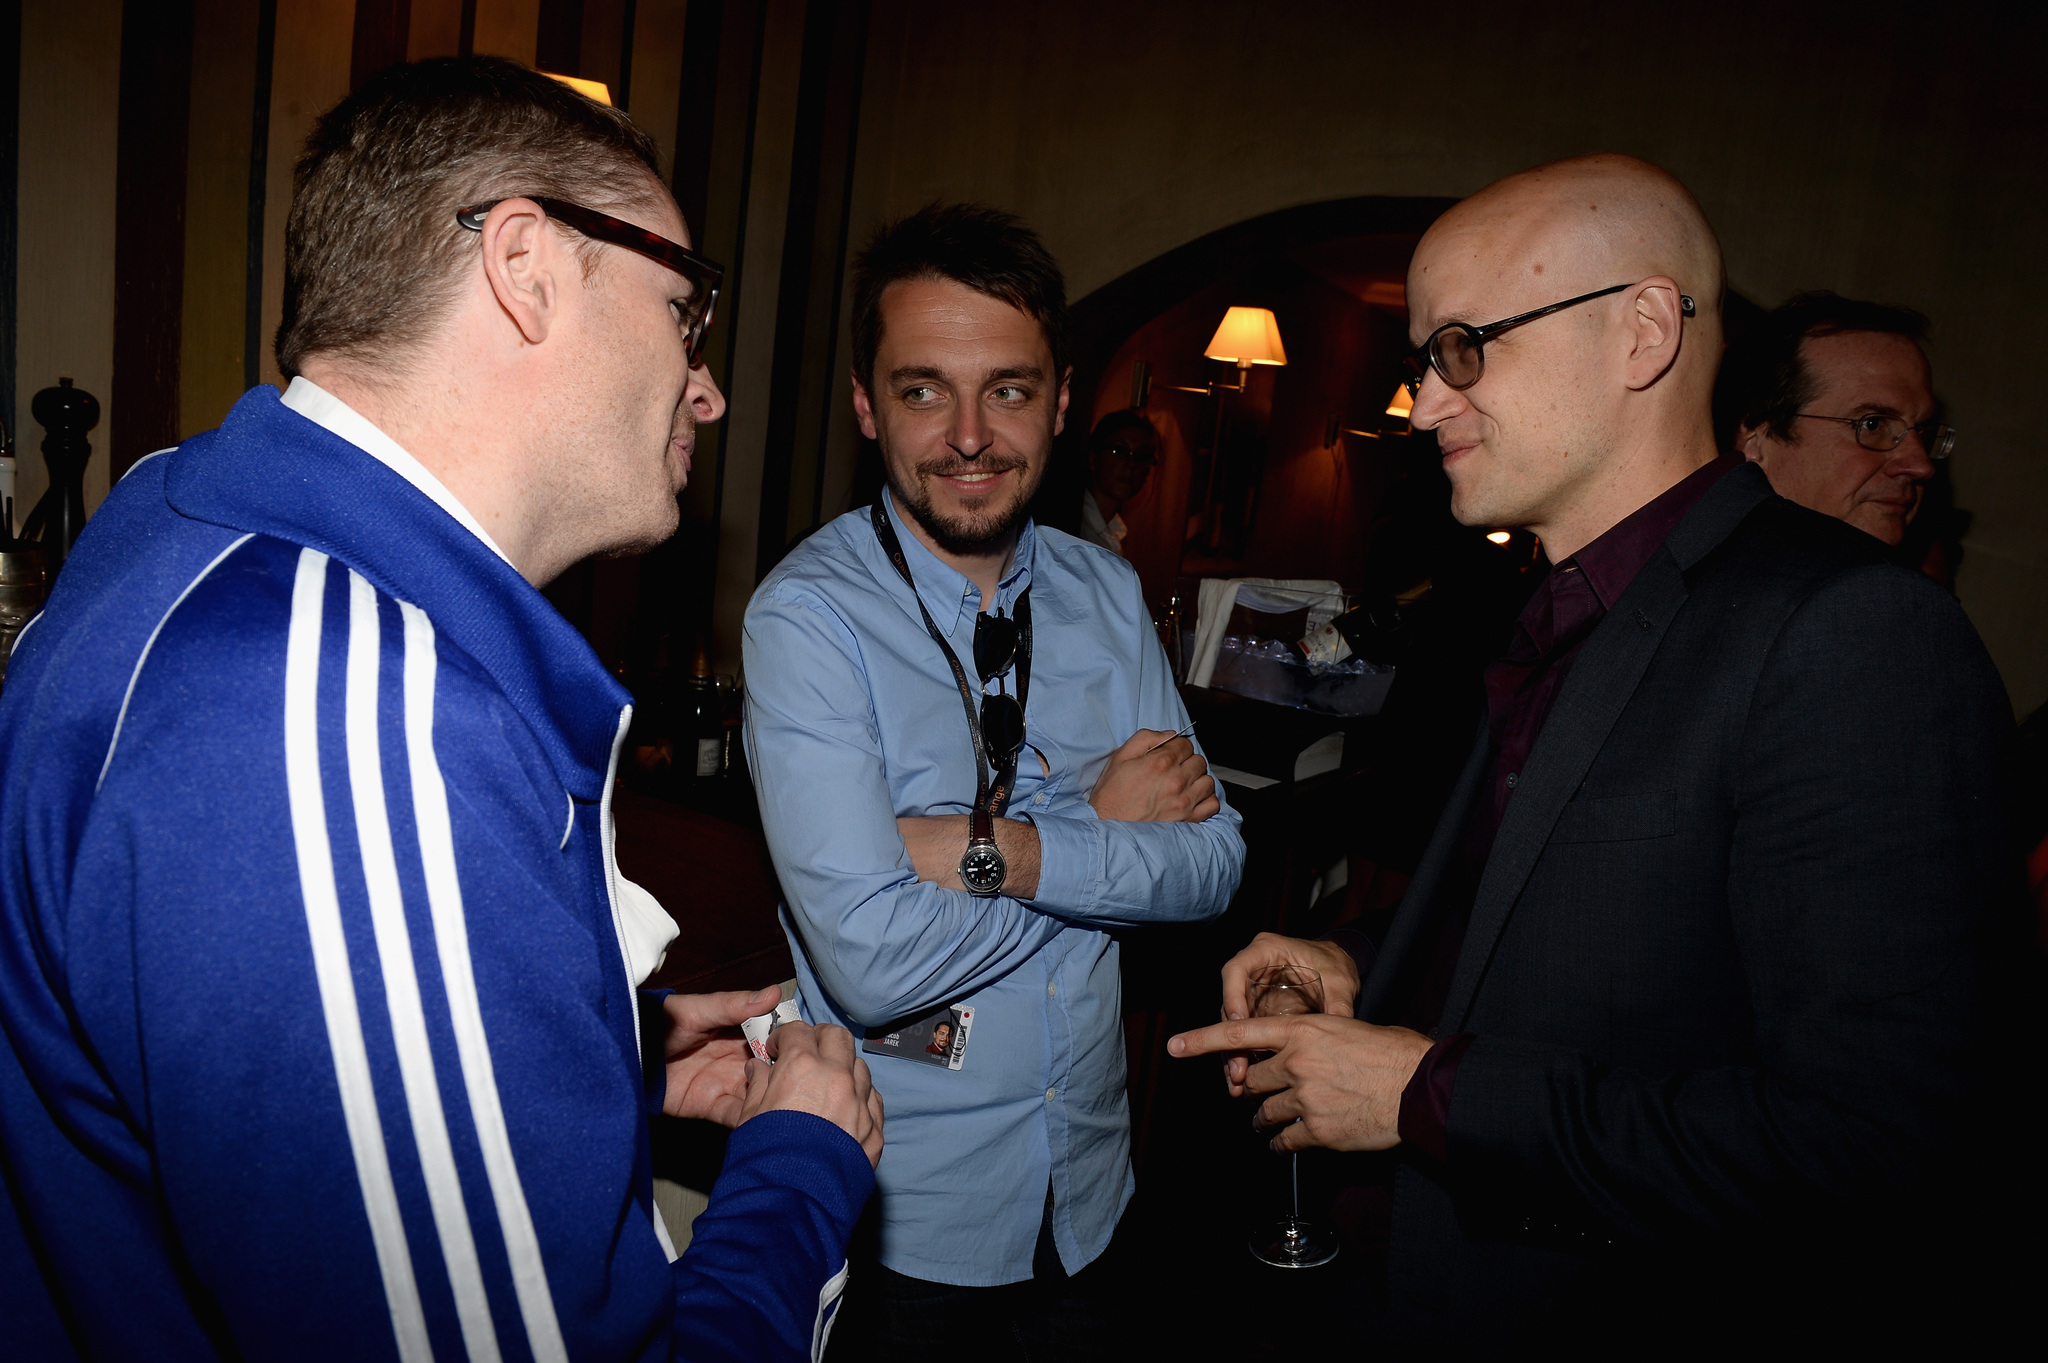 Director Nicolas Winding Refn (L), Jacob Jarek and guest attend the IMDB's 2013 Cannes Film Festival Dinner Party during the 66th Annual Cannes Film Festival at Restaurant Mantel on May 20, 2013 in Cannes, France.